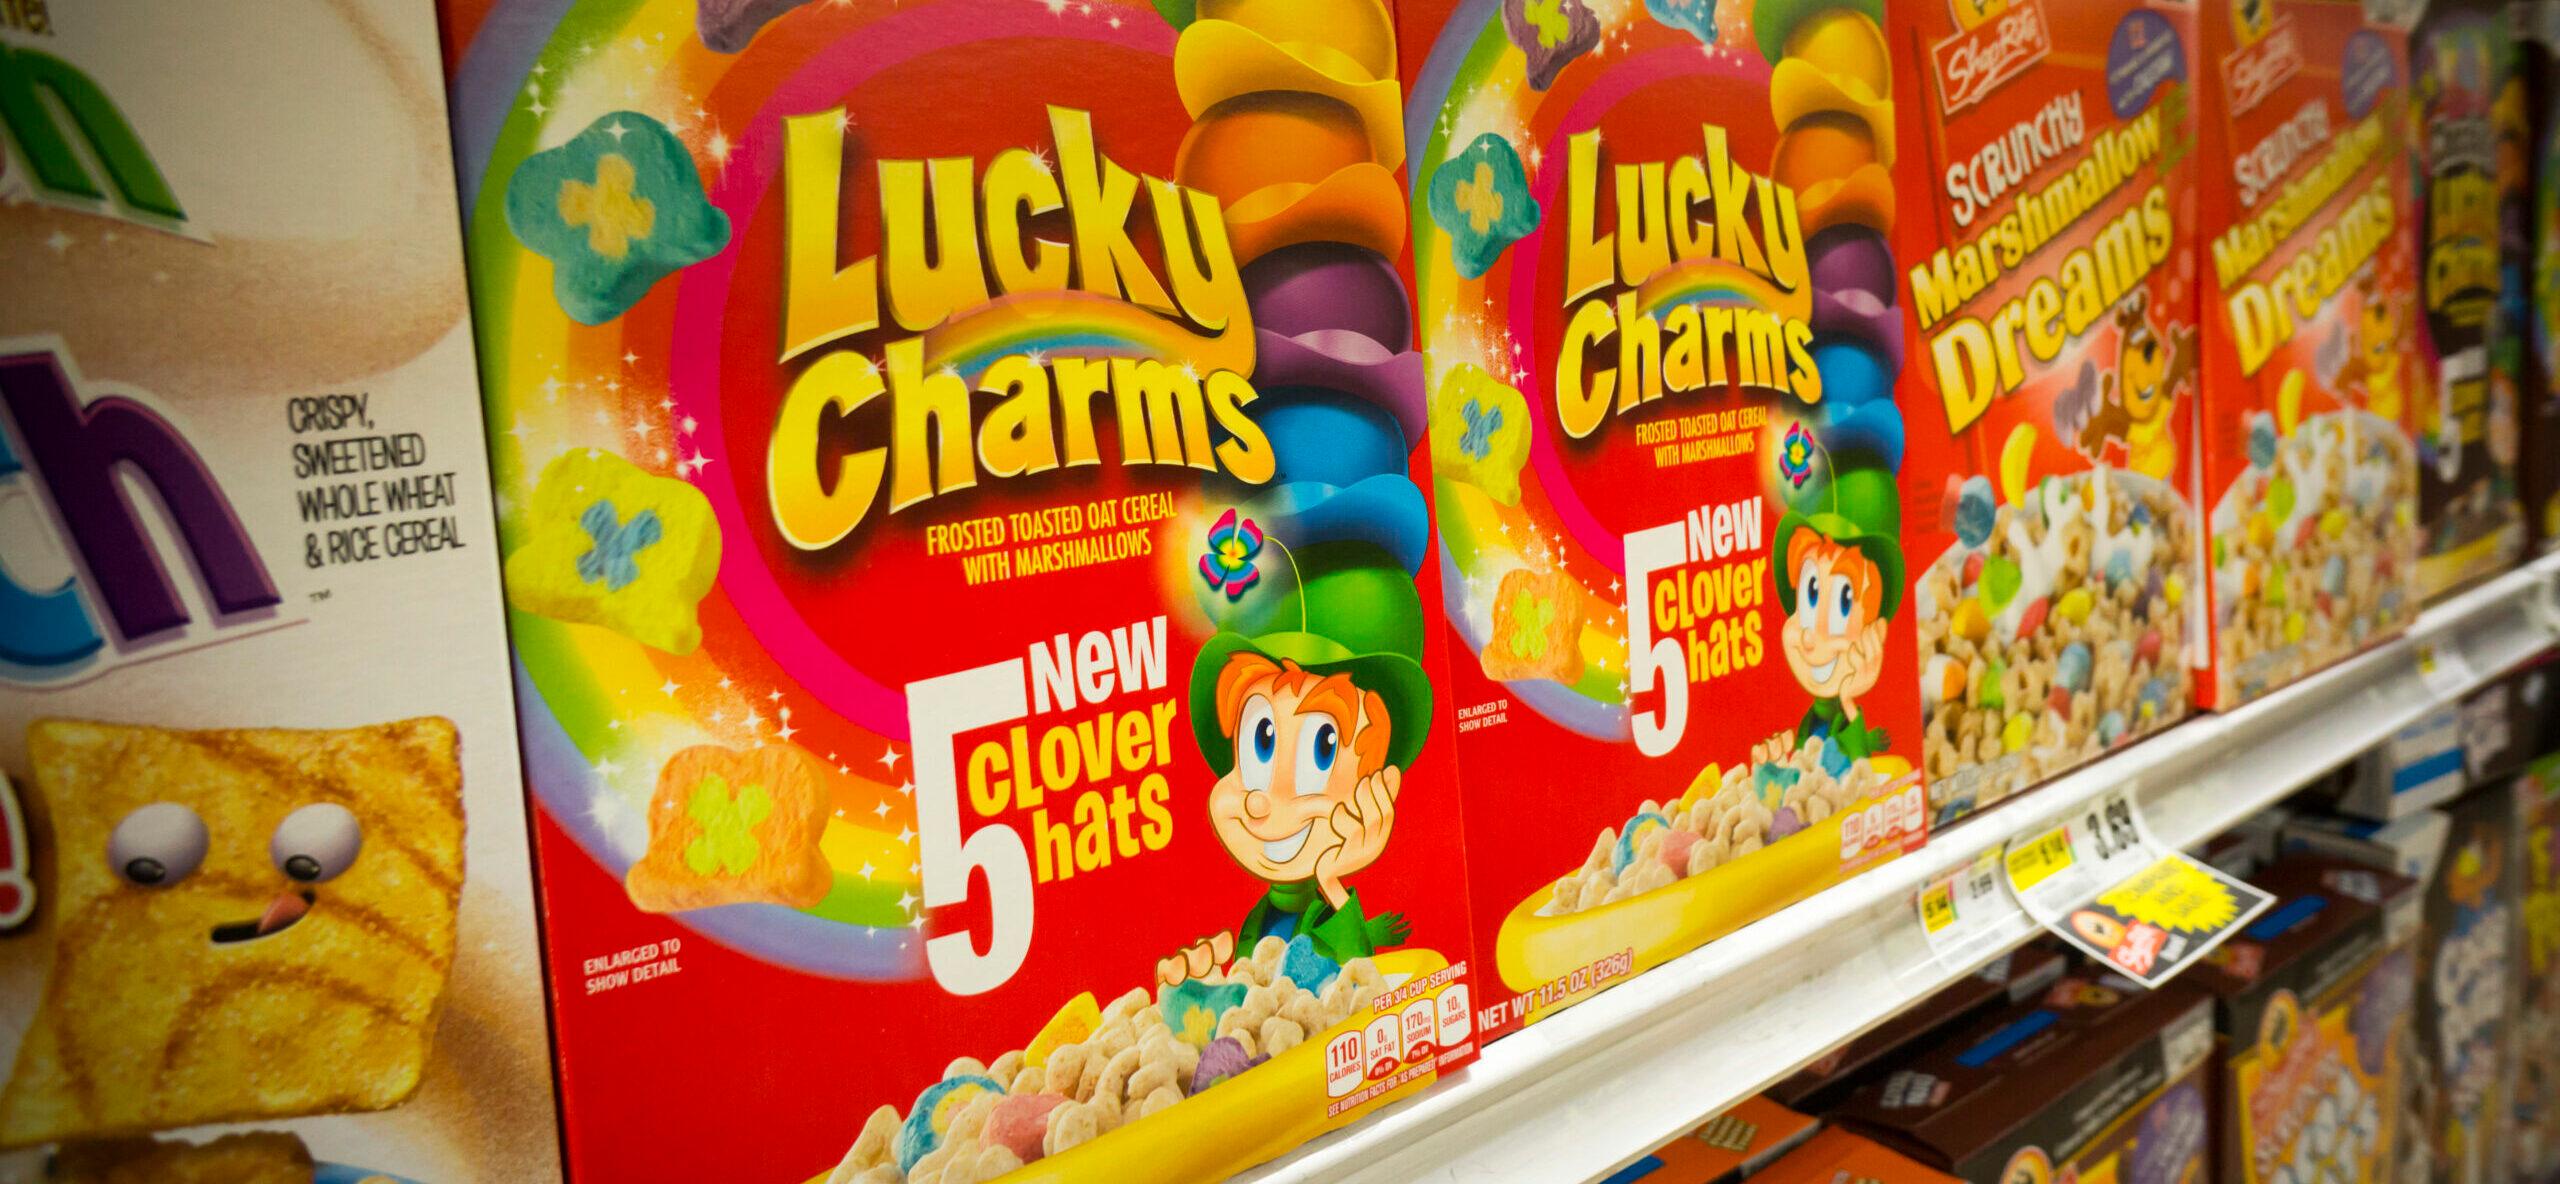 In advance of General Mills earnings call